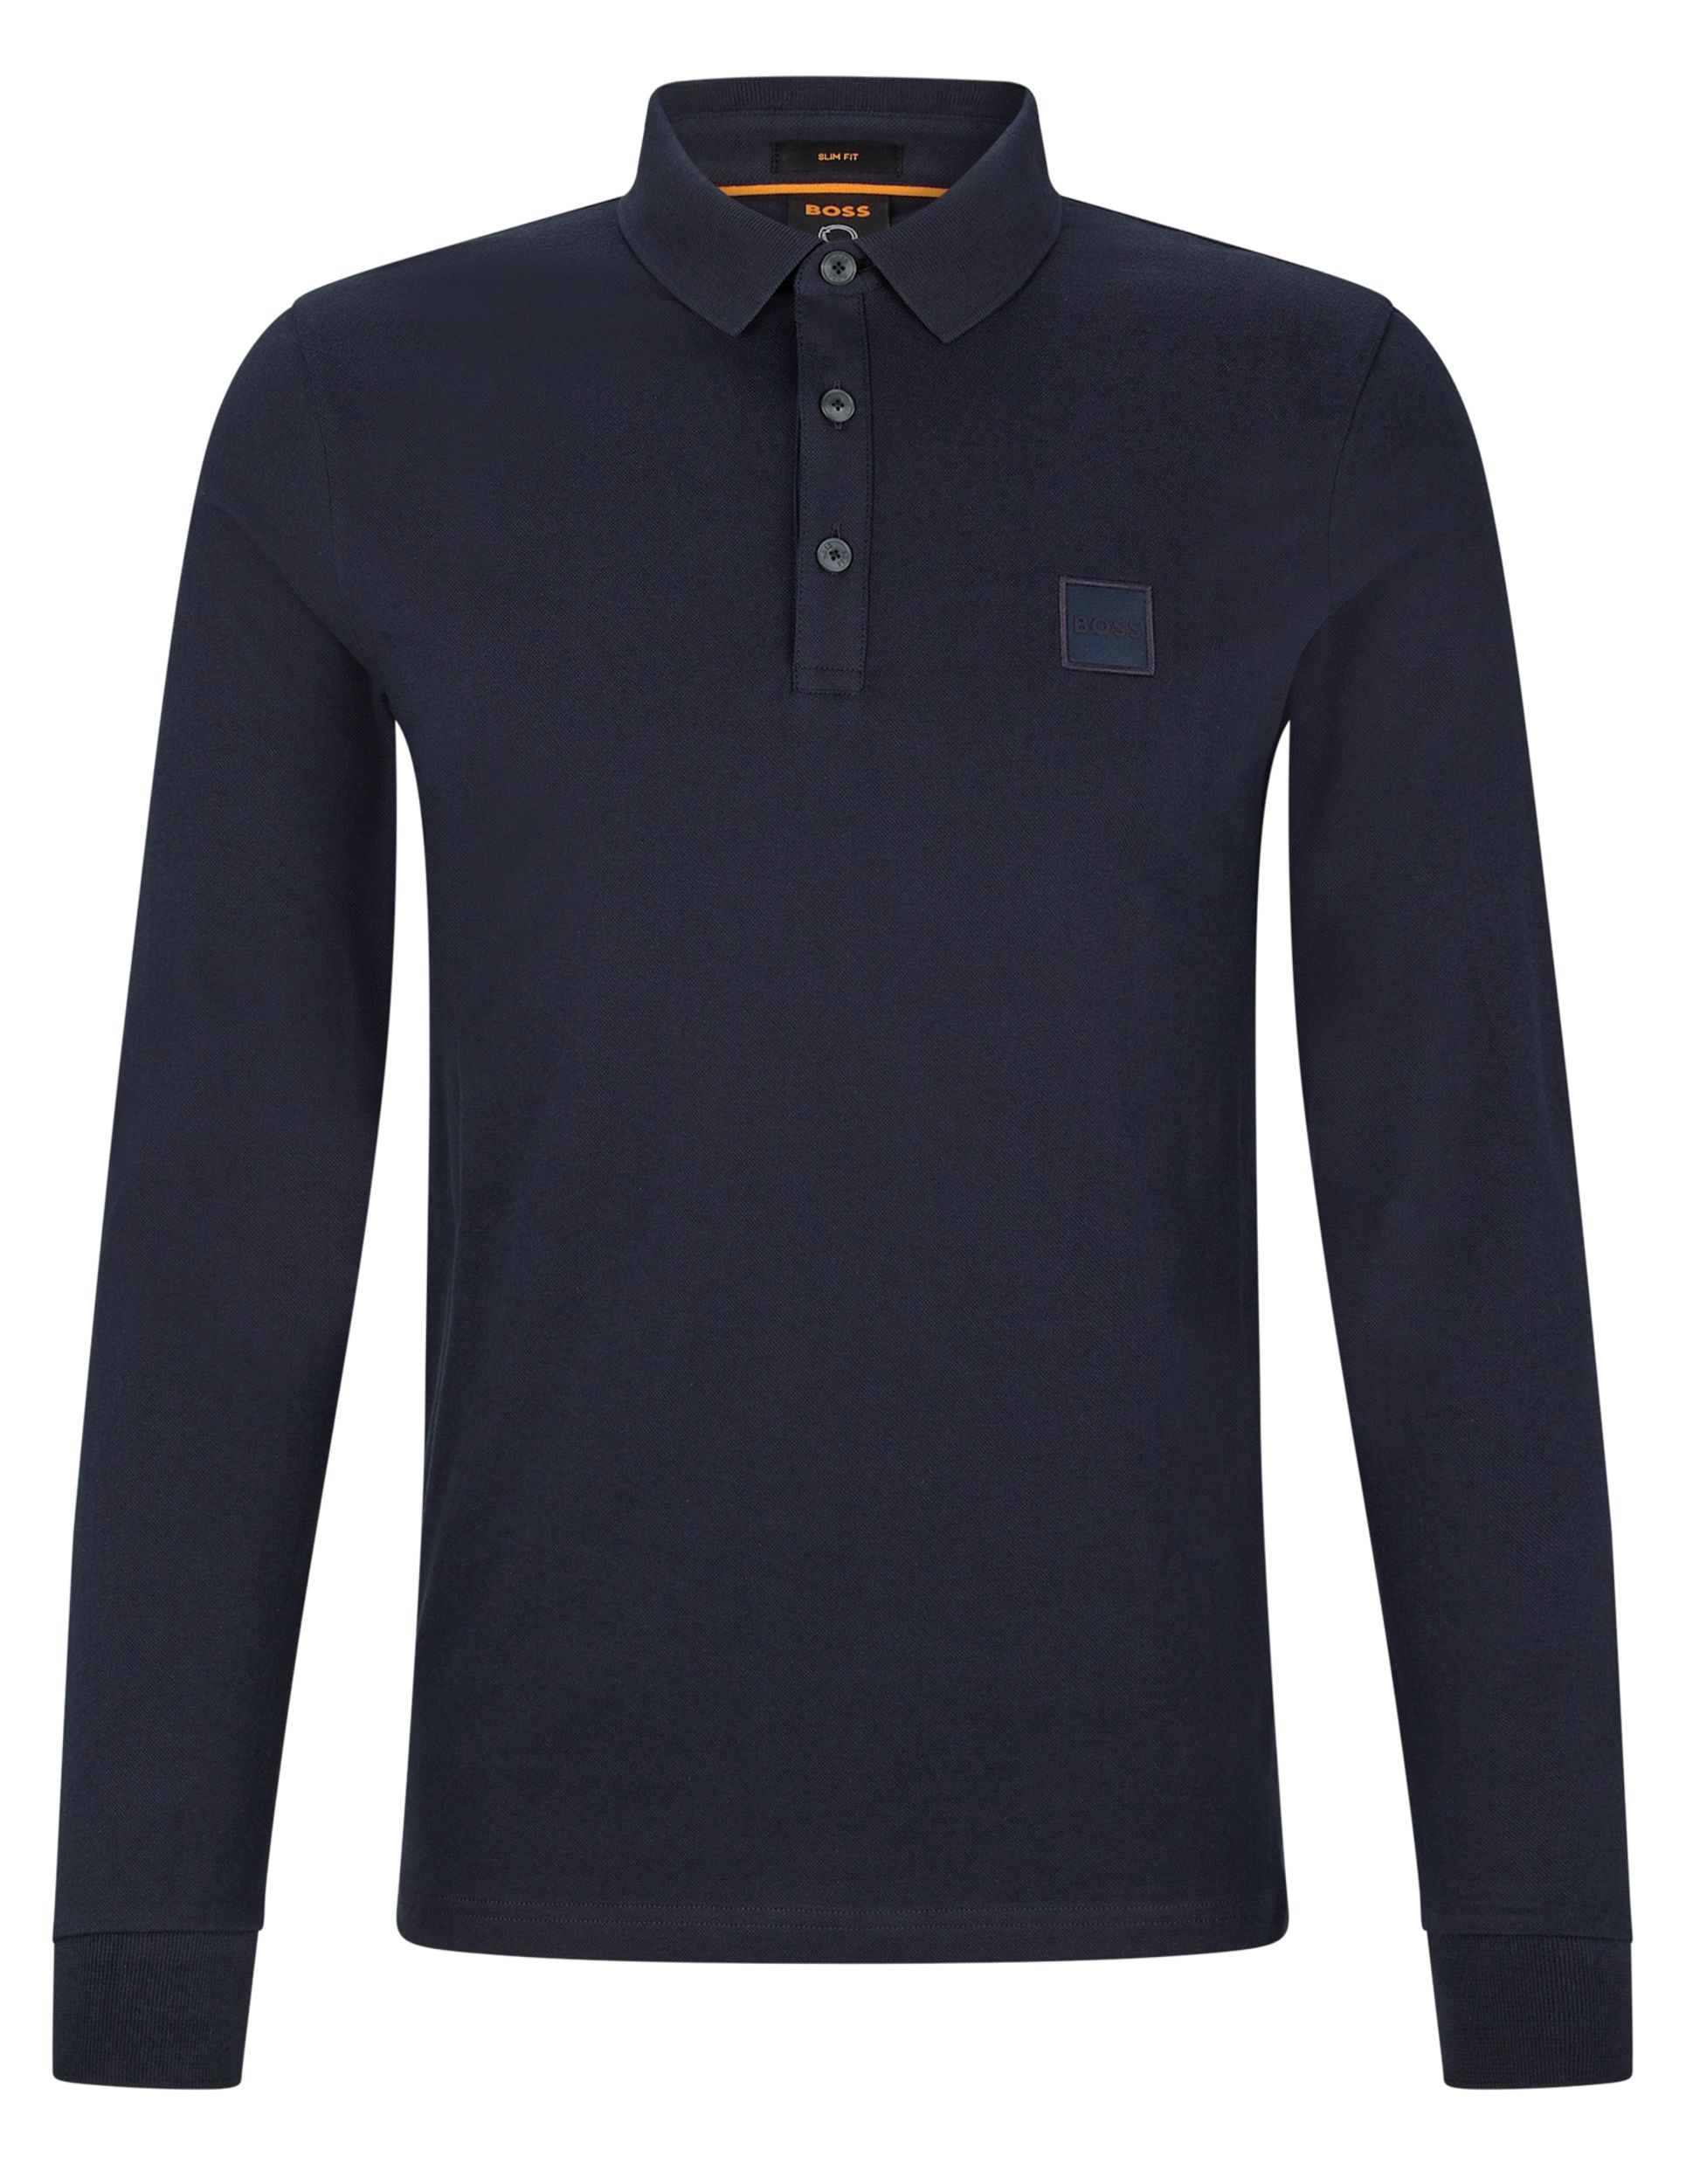 Hugo Boss Casual Passerby Polo LM Donker blauw 074035-001-L